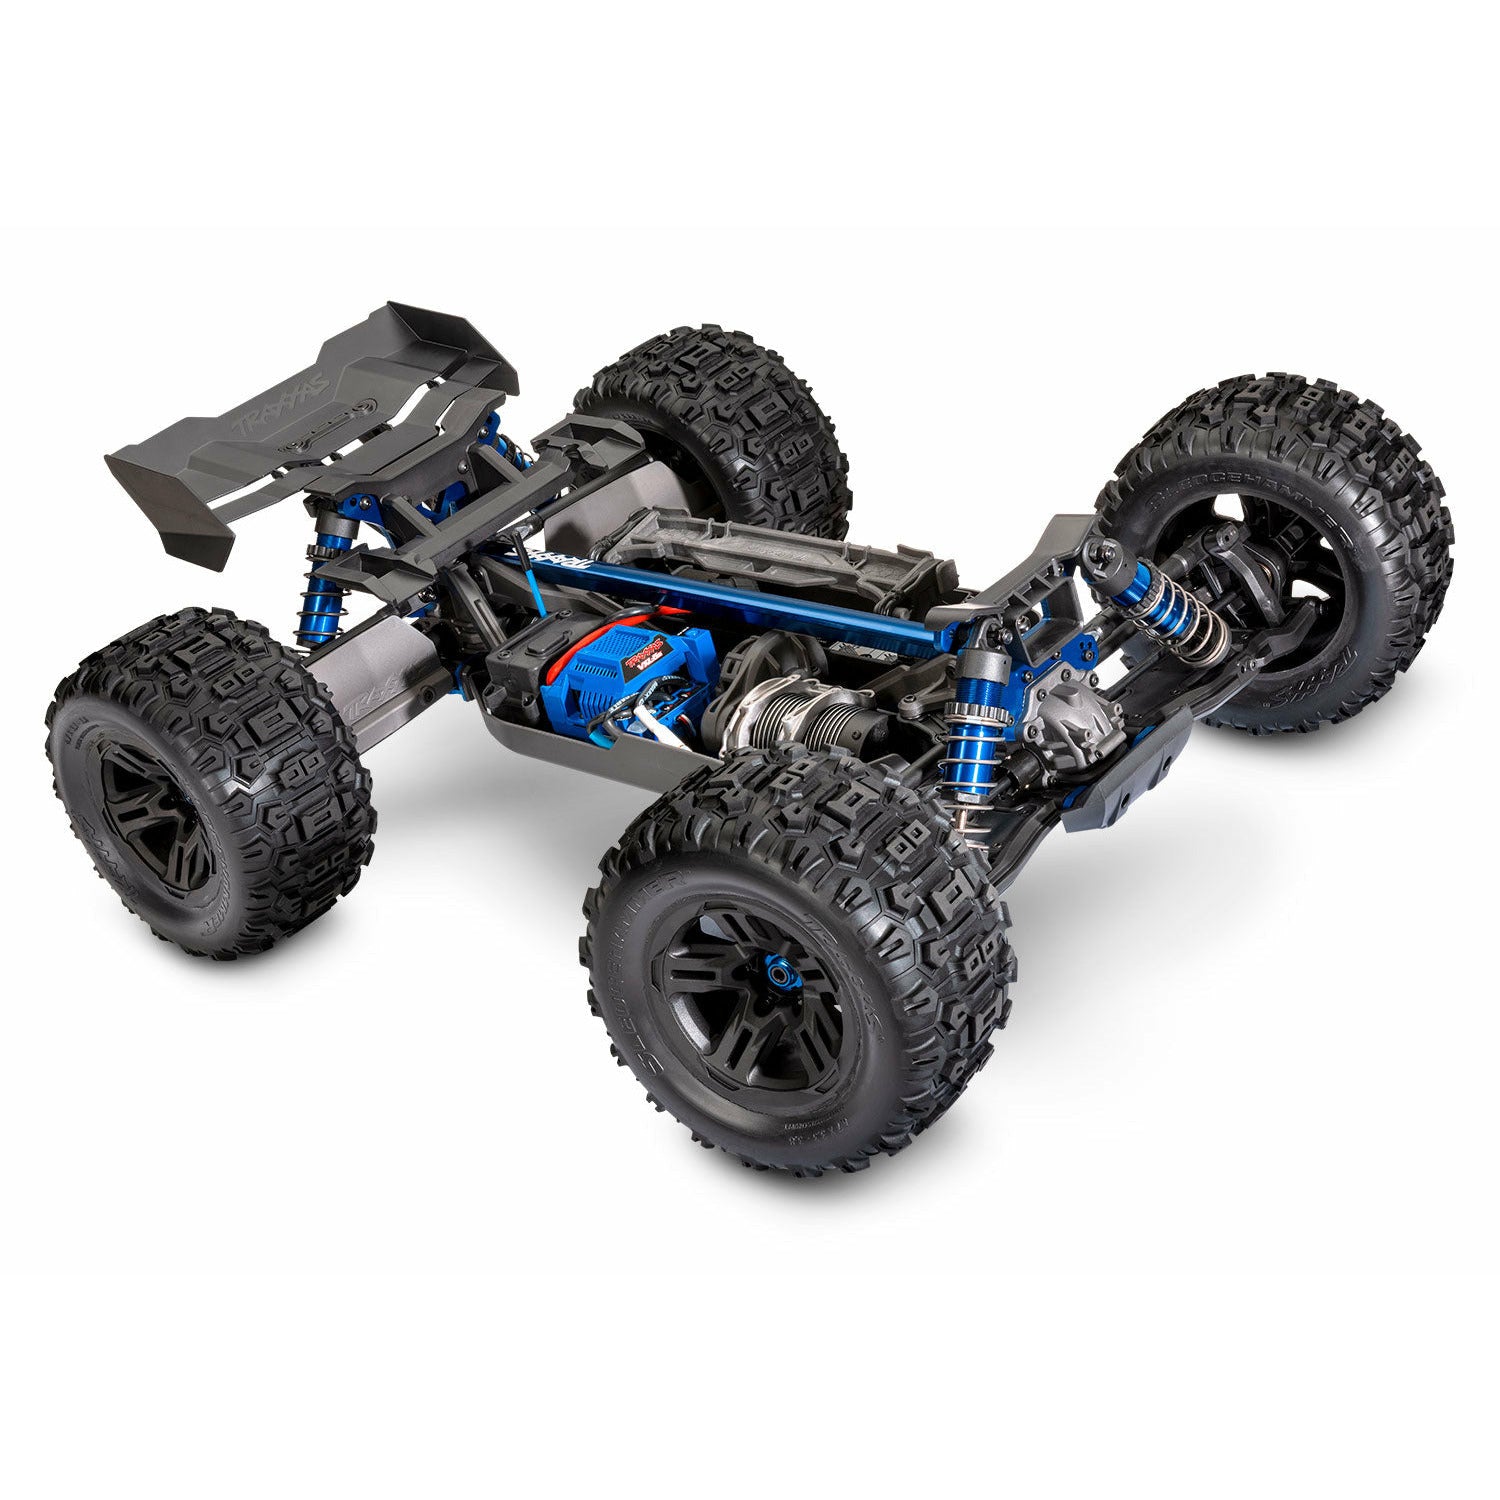 TRAXXAS Sledge Belted 1/8 Scale 4WD Brushless Electric Monster Truck - Green